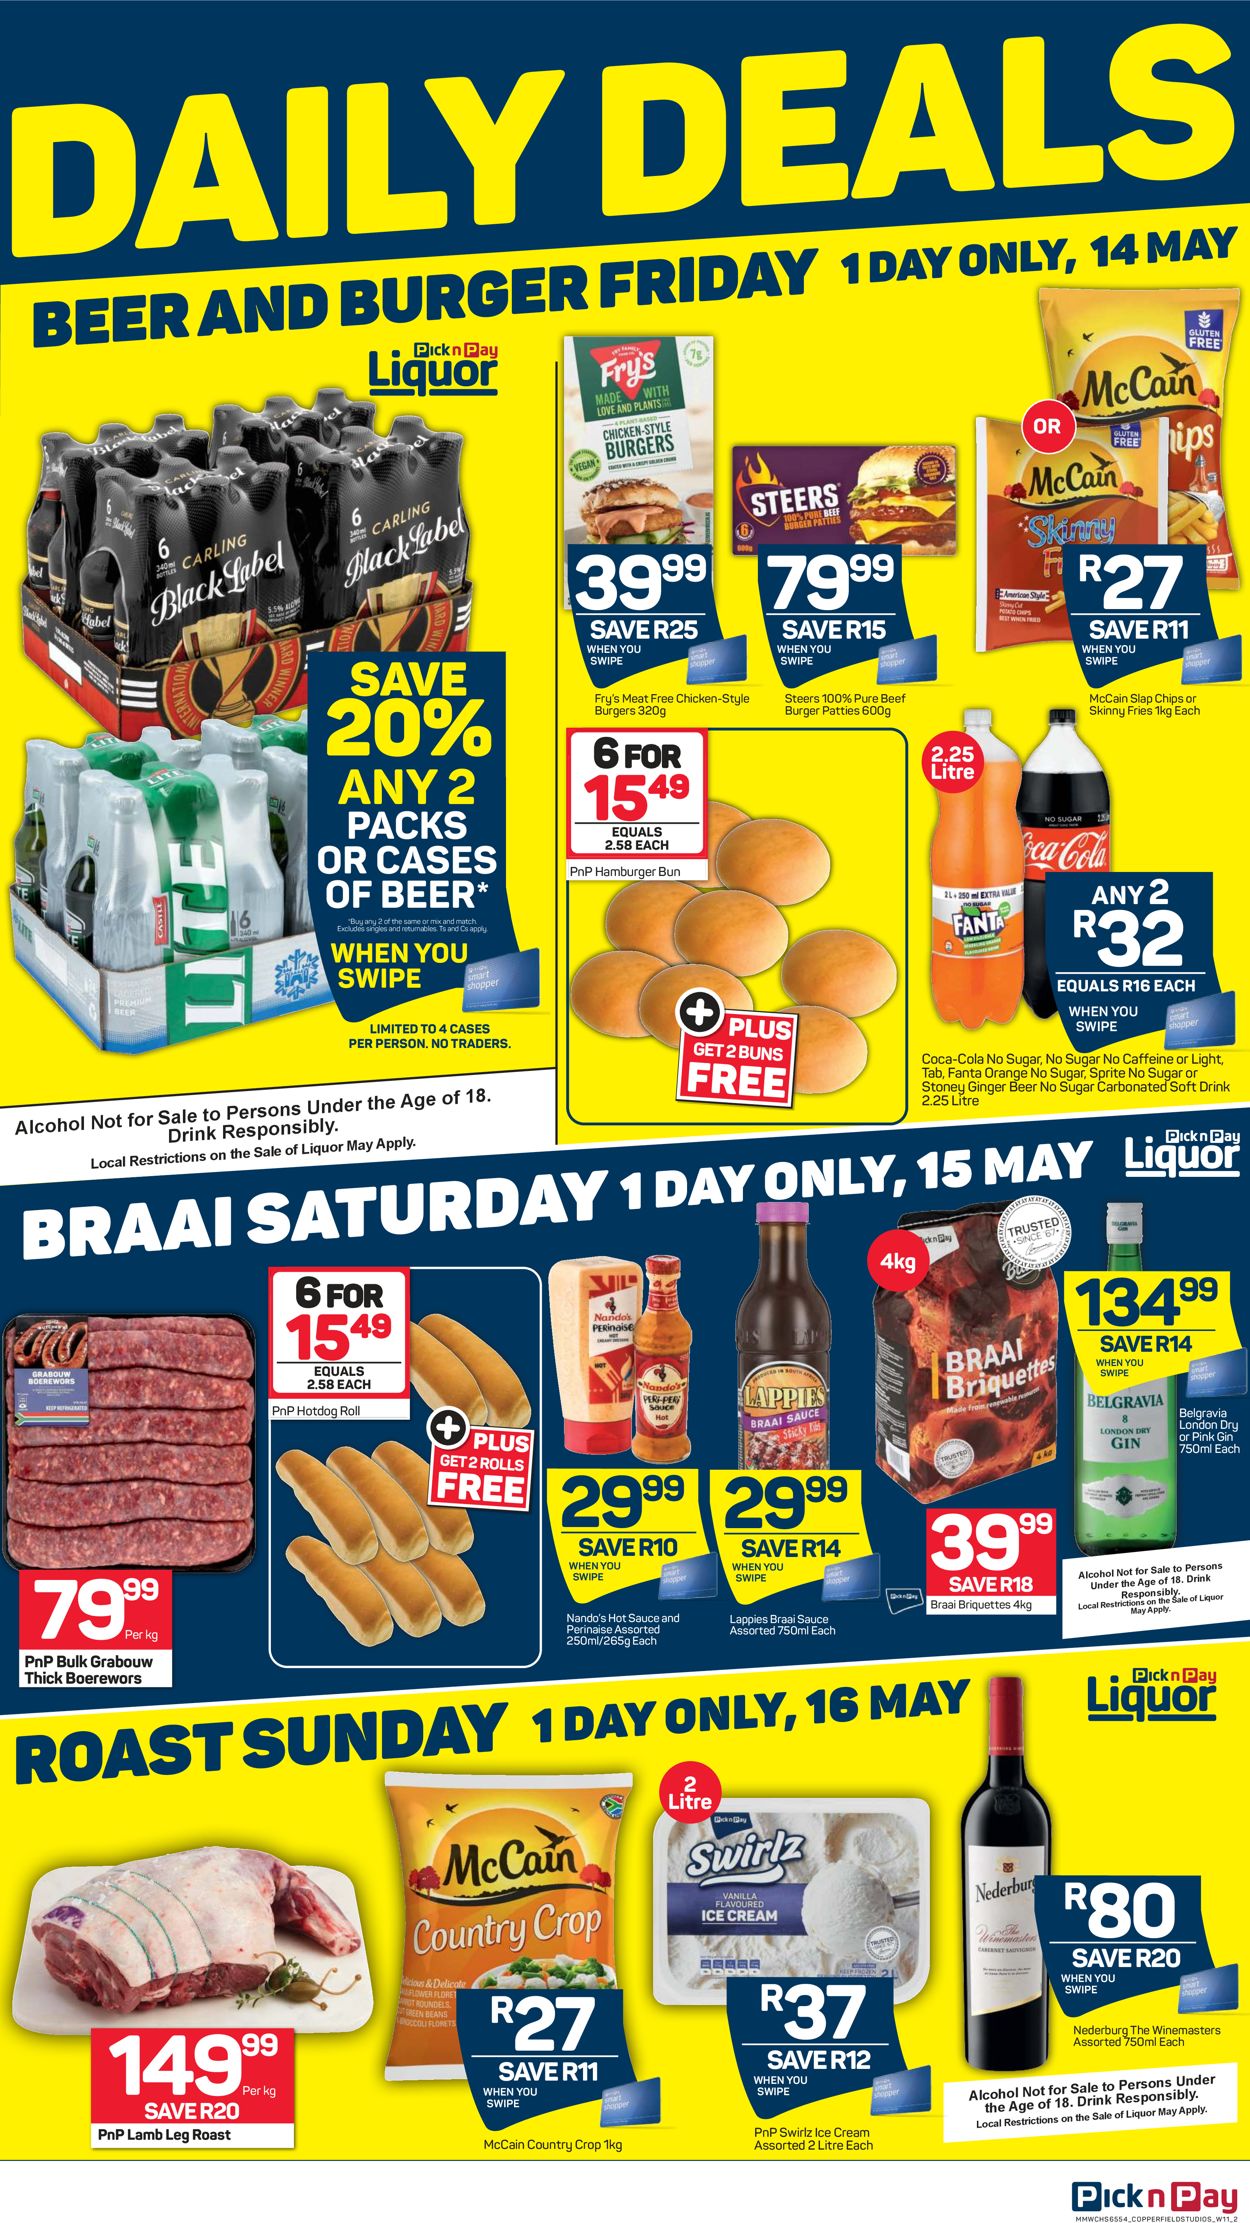 Pick n Pay Catalogue - 2021/05/13-2021/05/16 (Page 2)